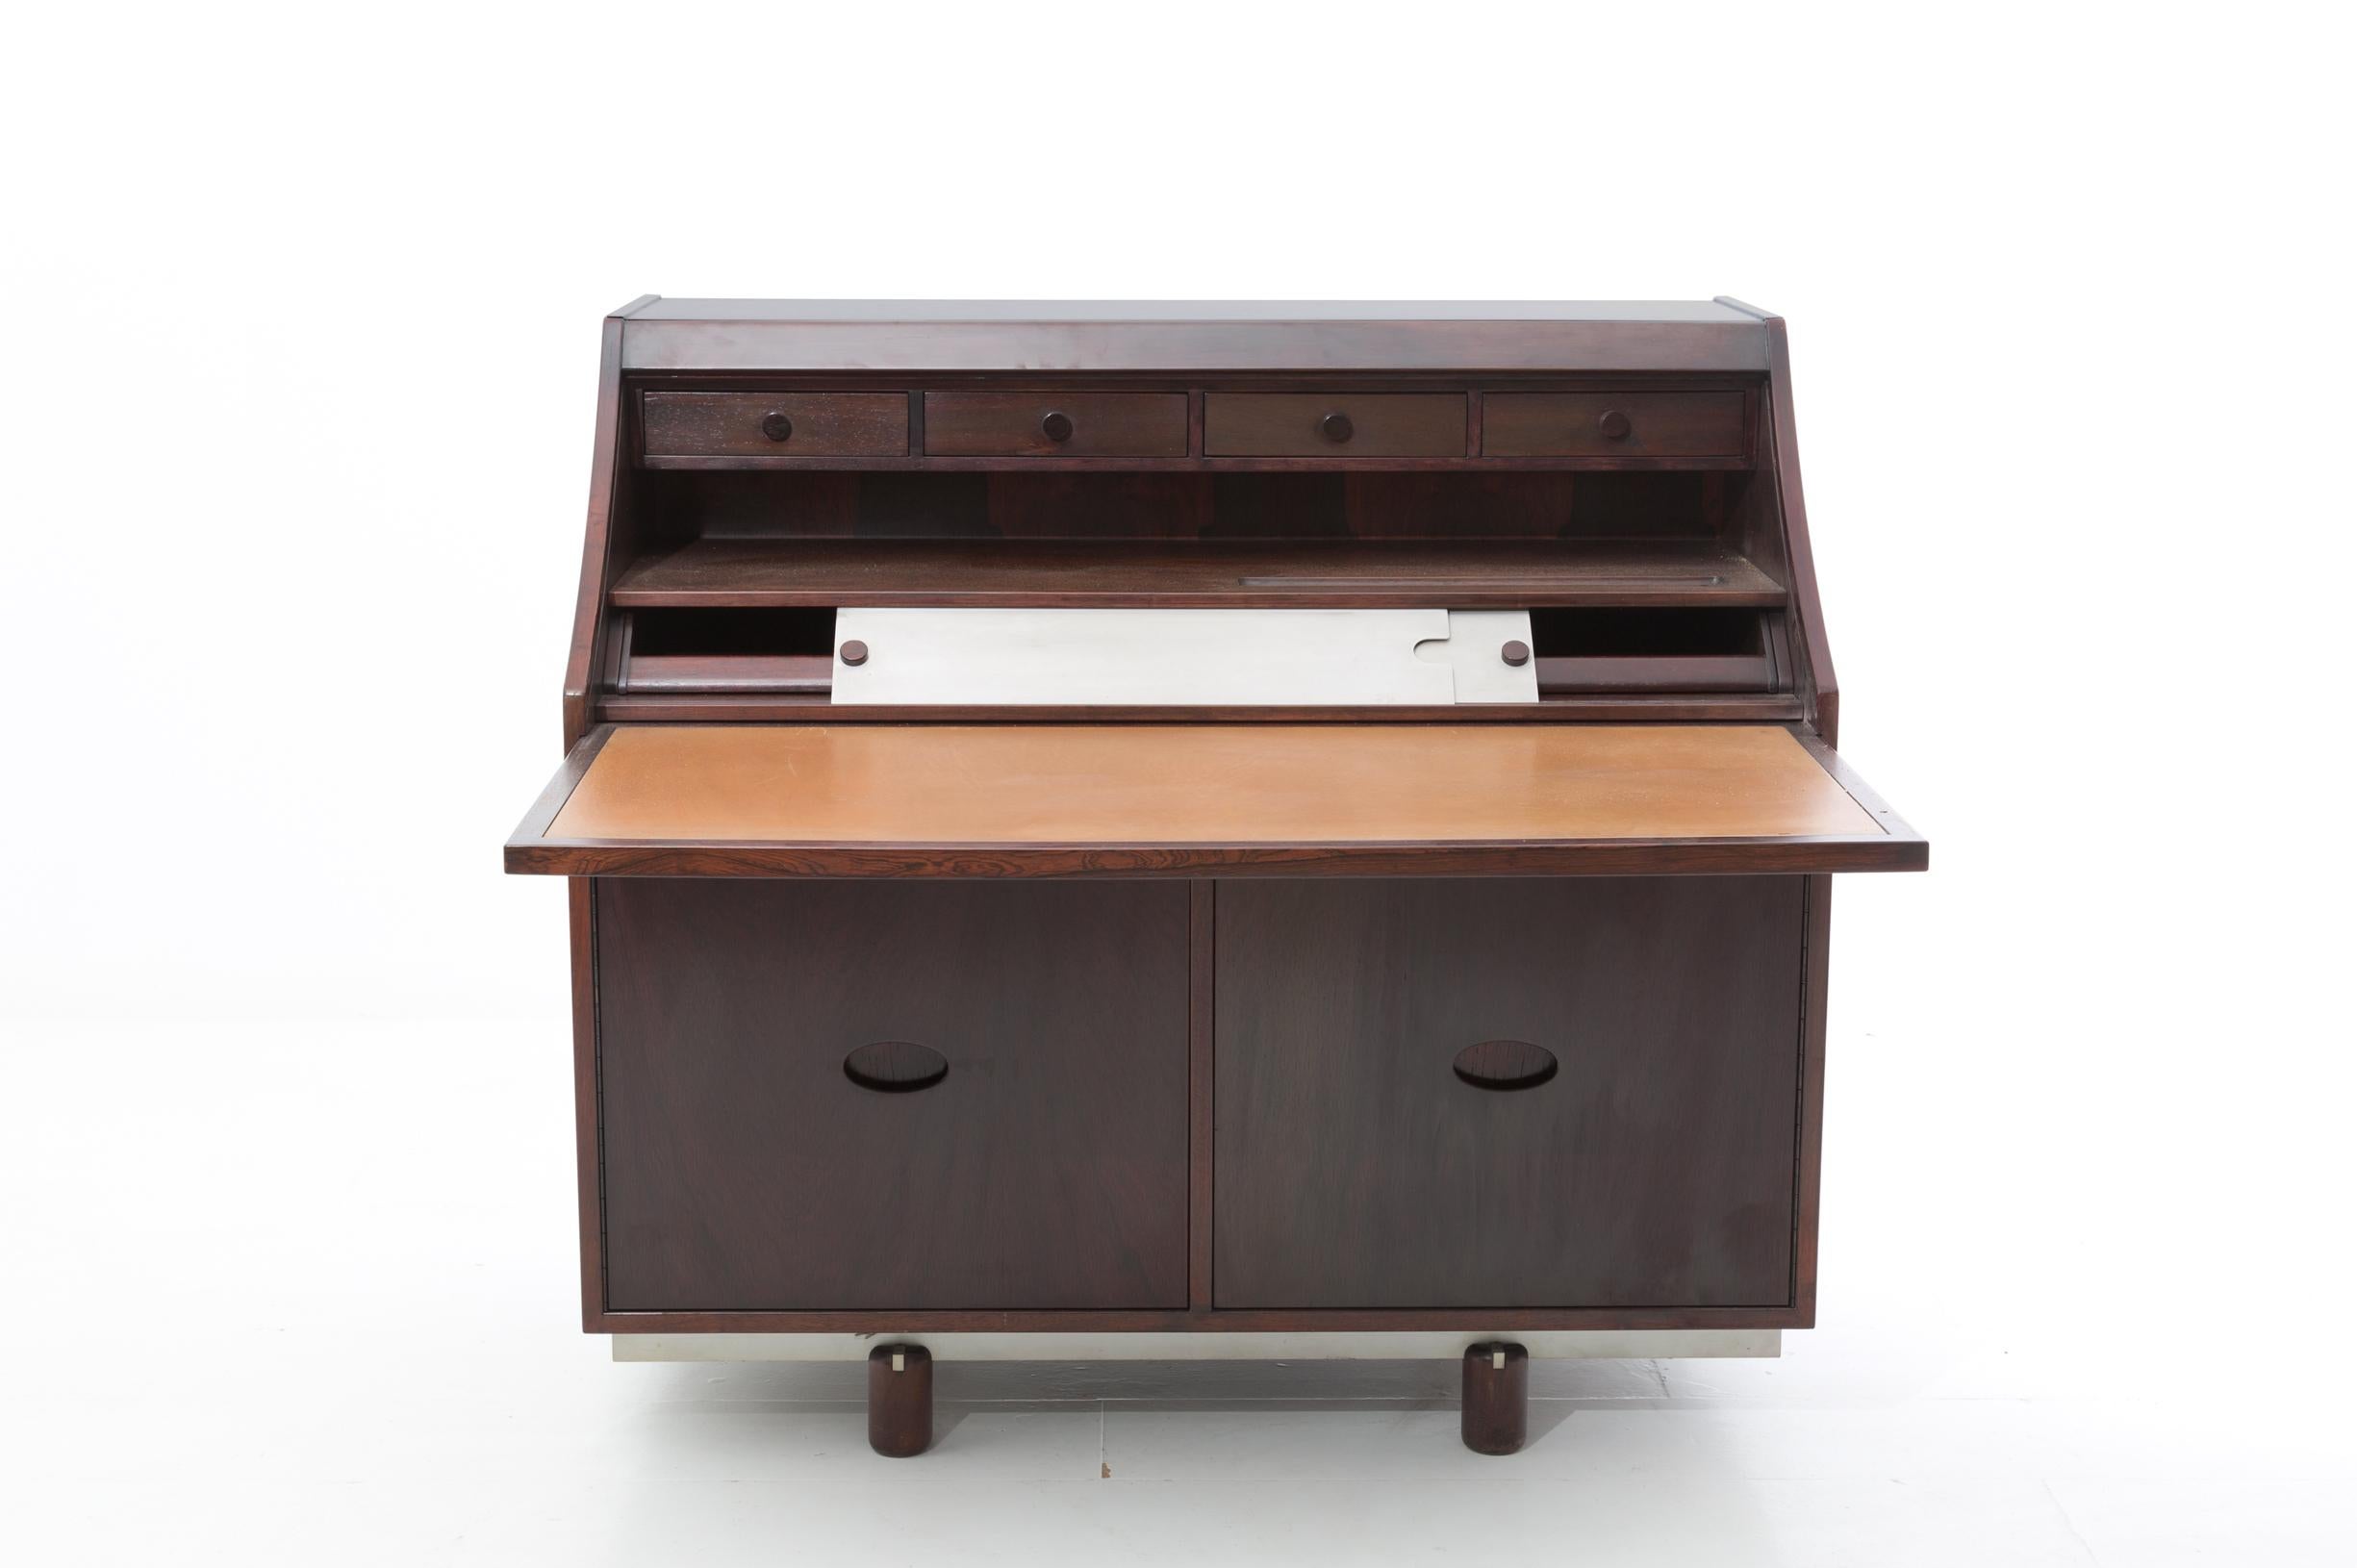 Writing desk designed by Gianfranco Frattini for the Bernini factory in 1960. The structure is in rosewood.
The desk is made of rosewood. The desk opens with a shutter opening. Inside there are 4 drawers for objects, a rosewood shelf and a white